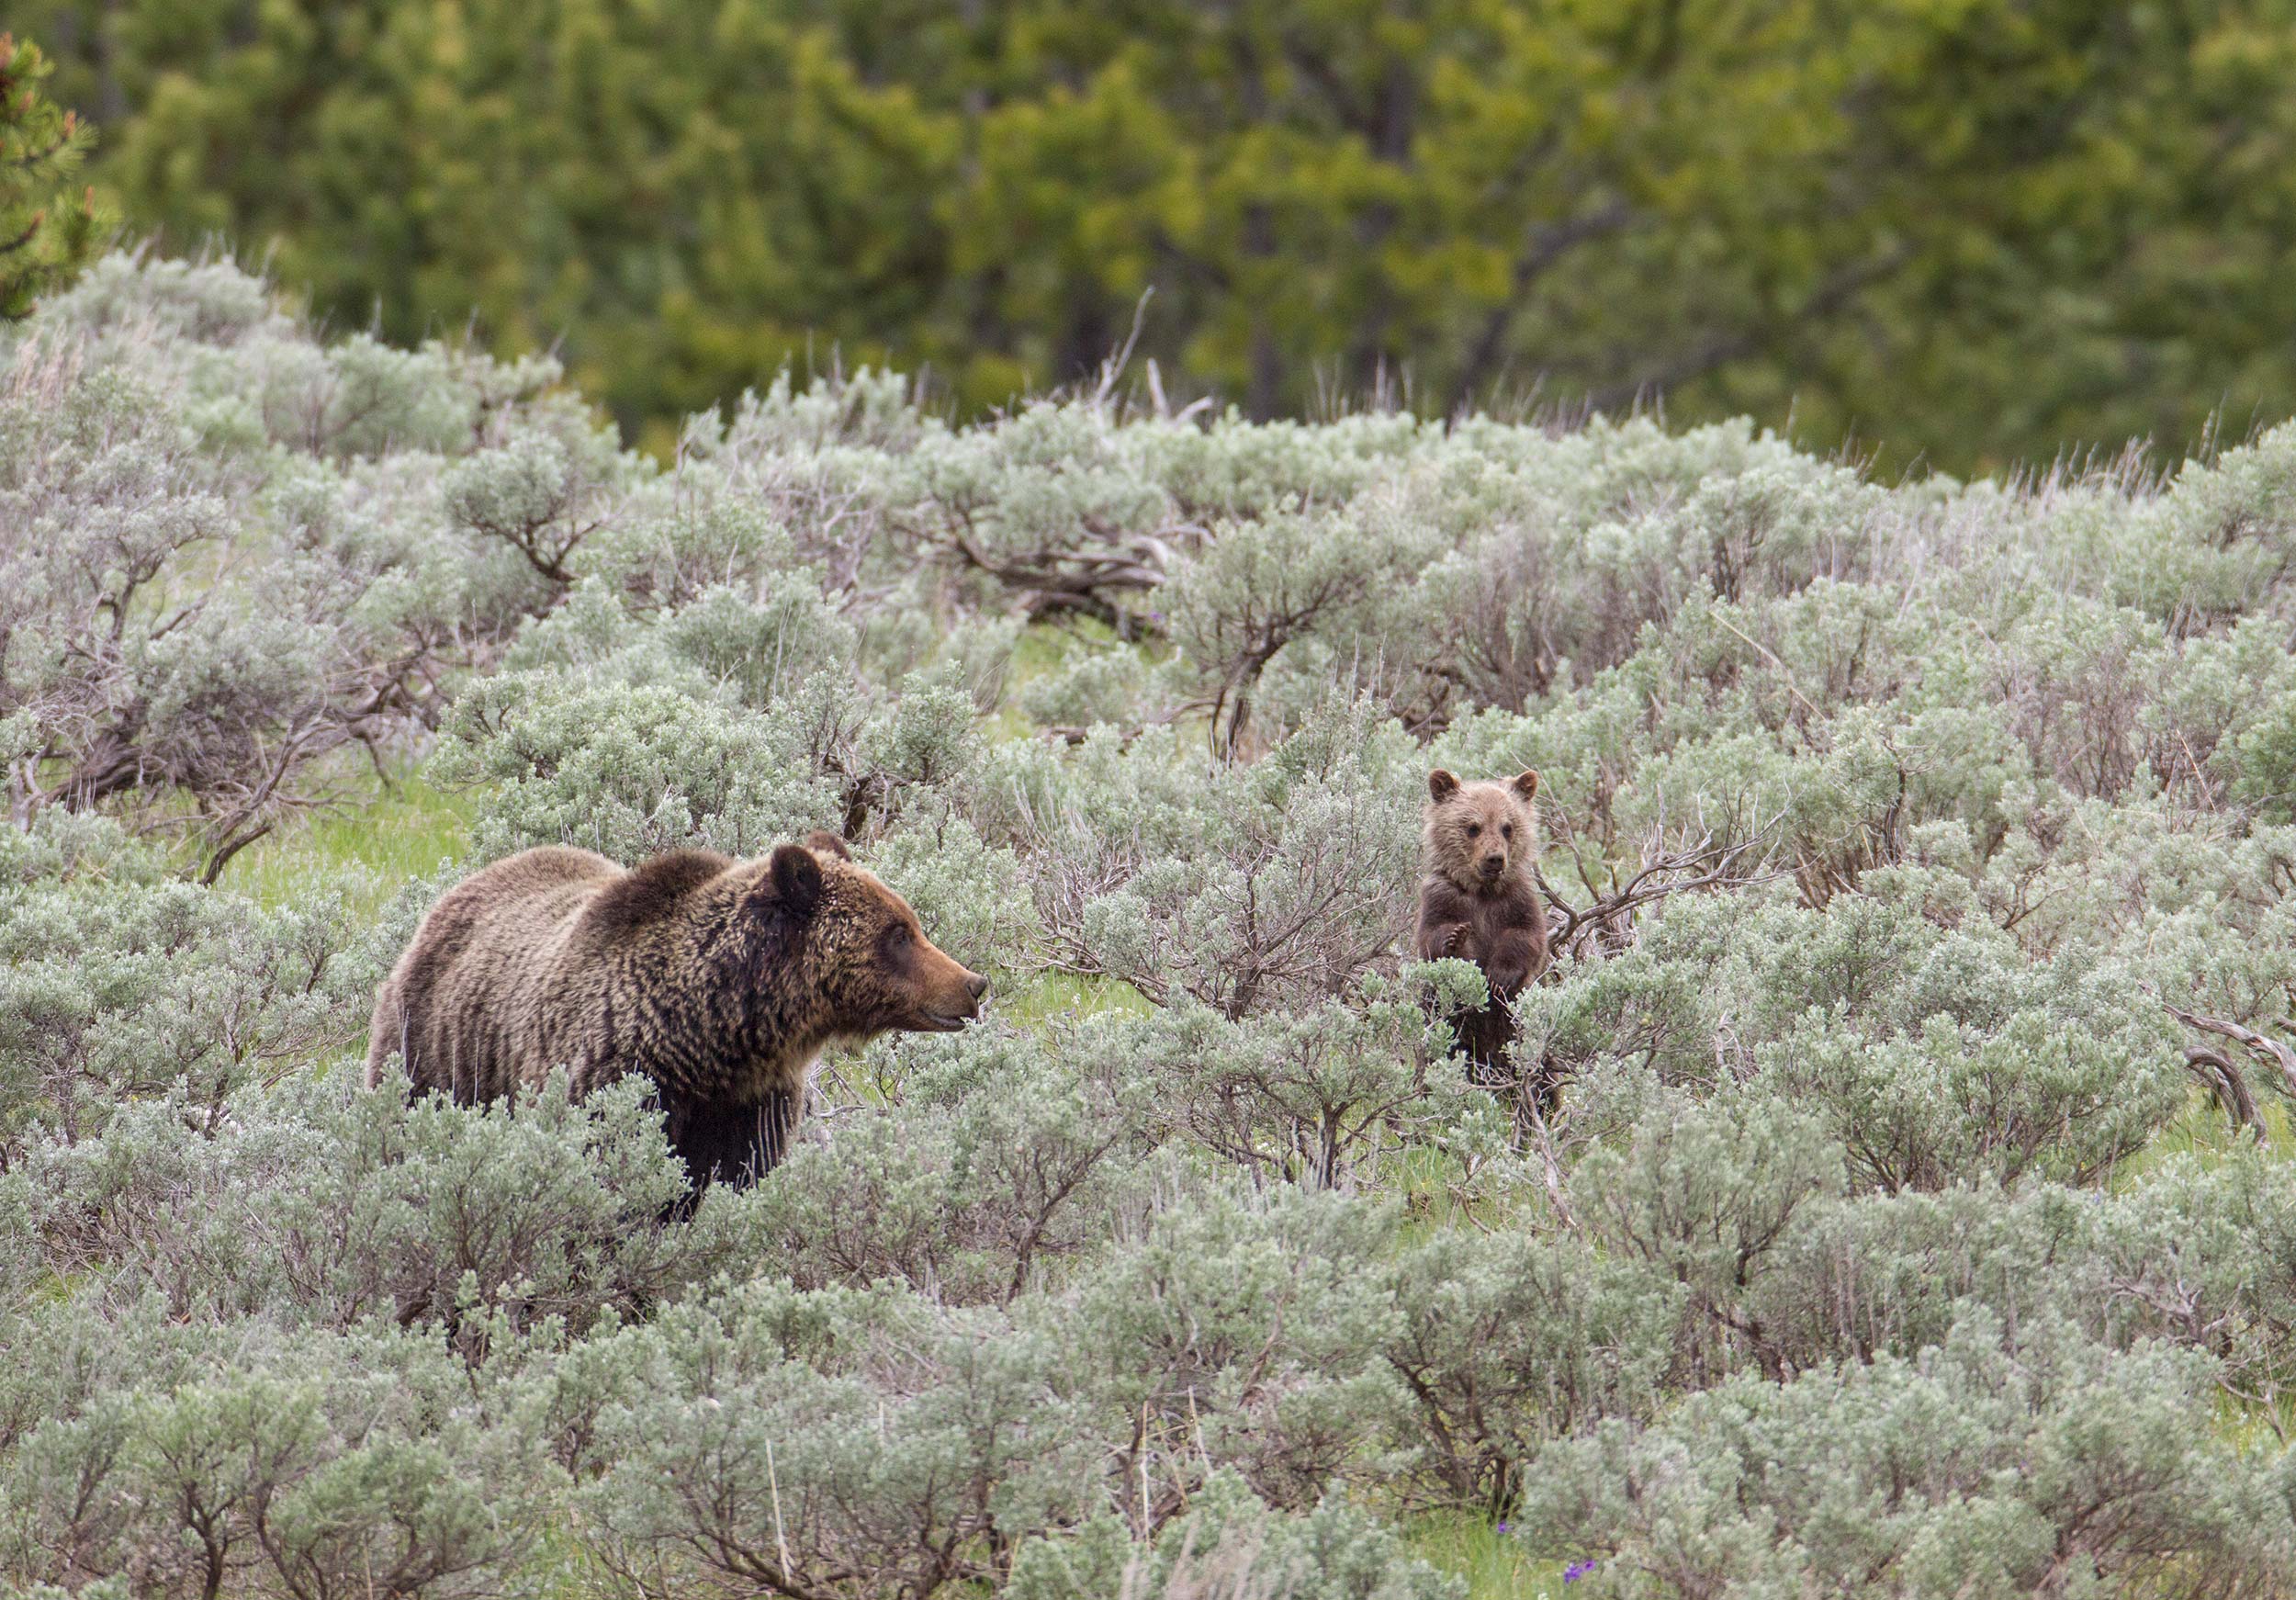 Female brown bear with cub in bushes